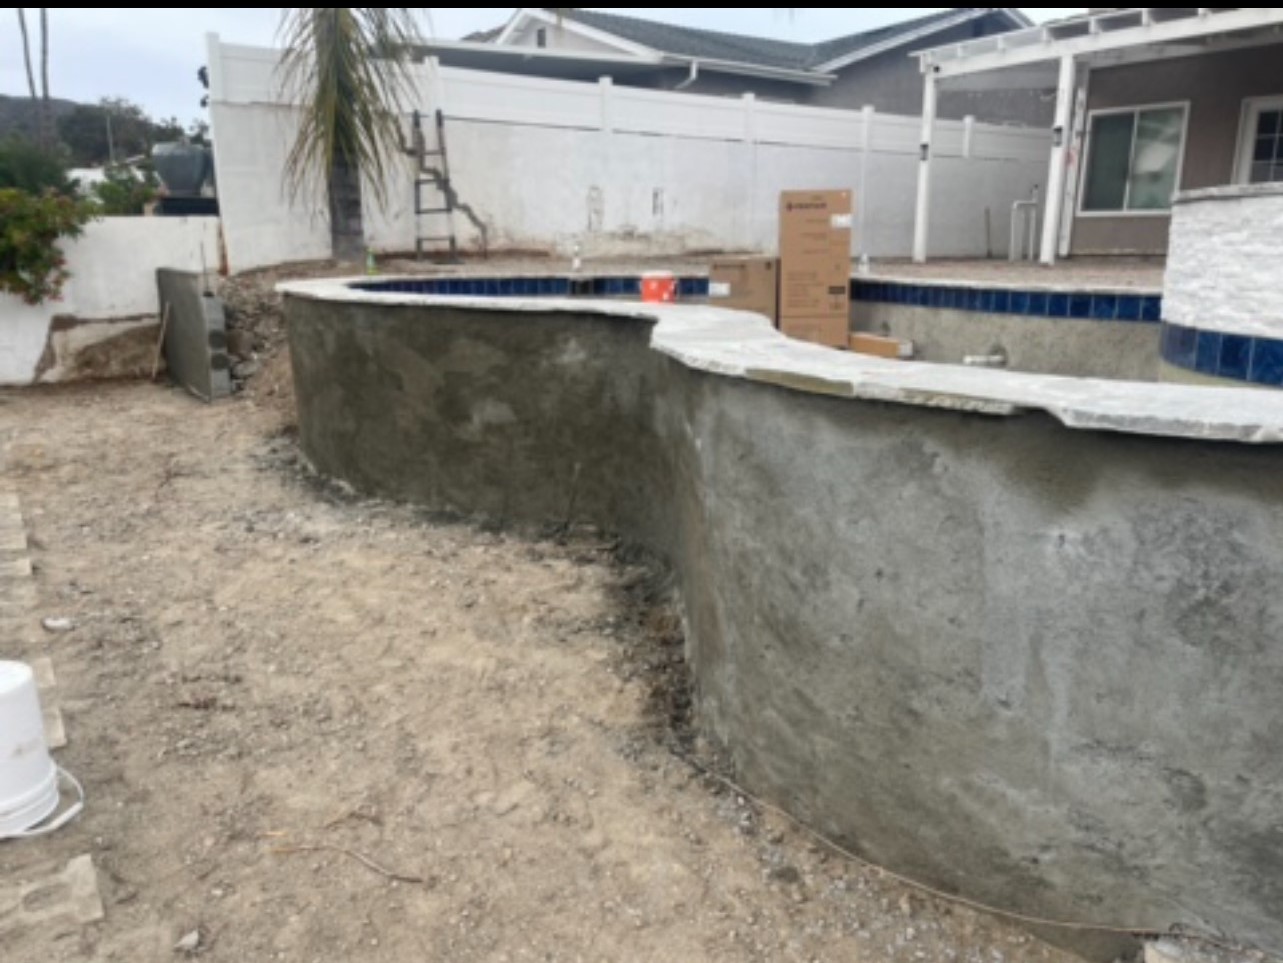 An unfinished pool in a backyard